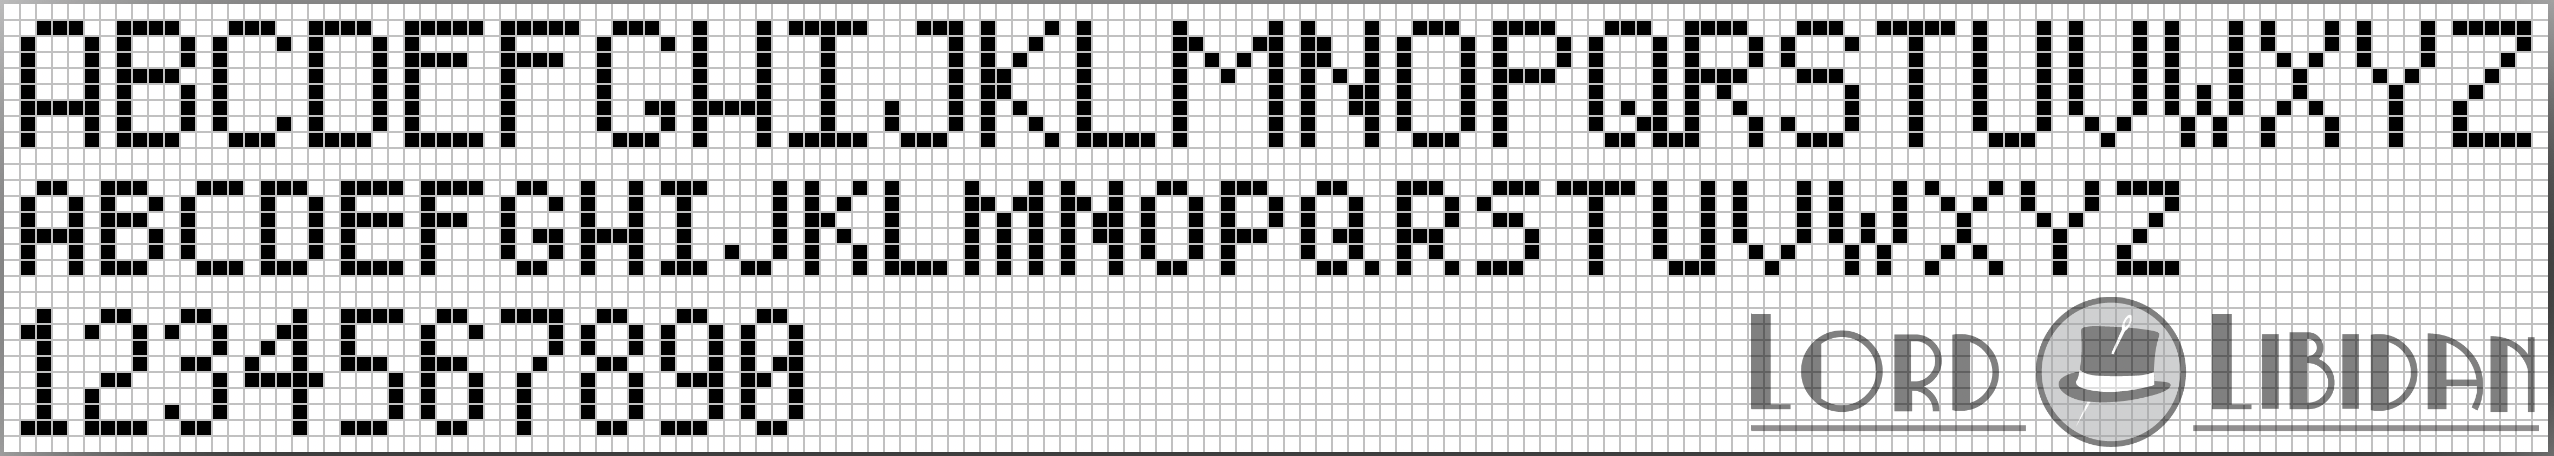 Full Caps Arial Cross Stitch Alphabet Pattern Free Download by Lord Libidan